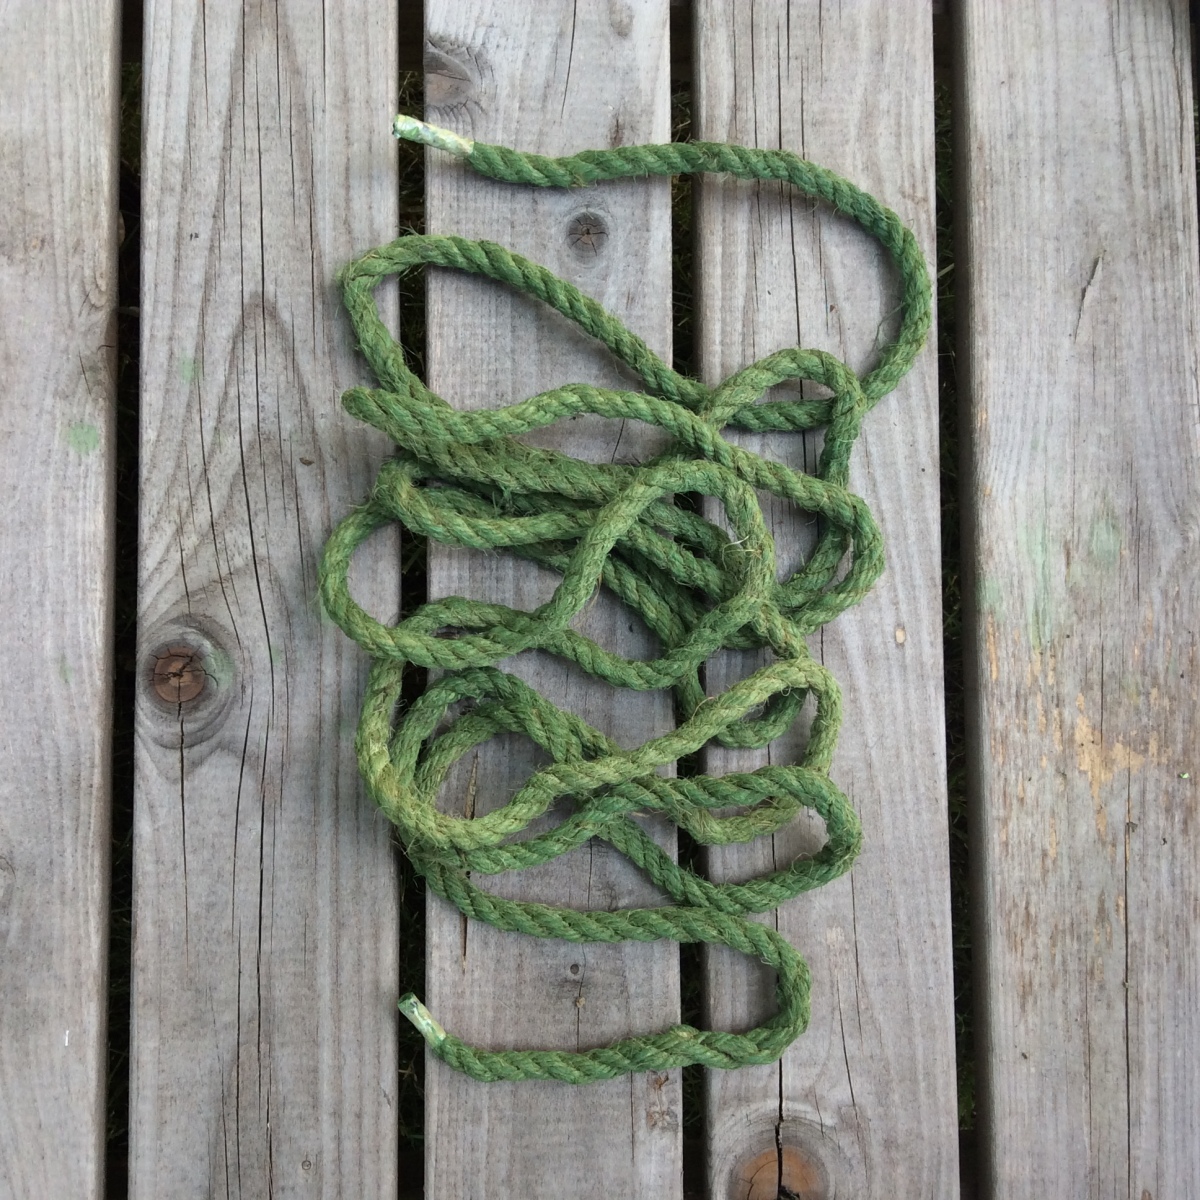 How to dye jute rope for craft projects. – Crafty Creator